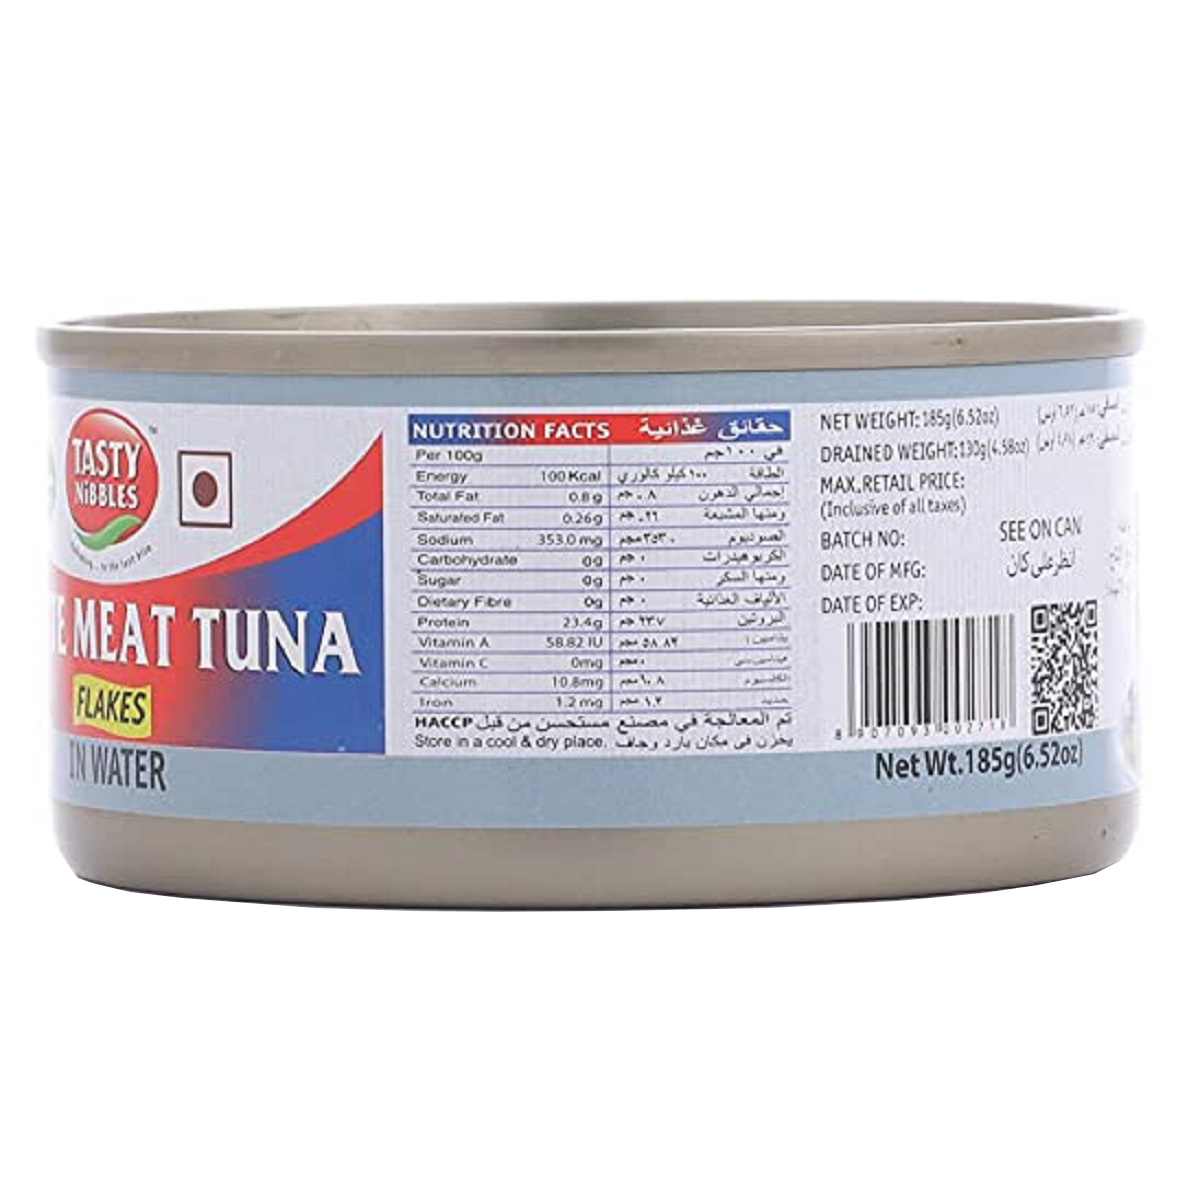 Tasty Nibbles White Meat Tuna Flakes In Water 185g